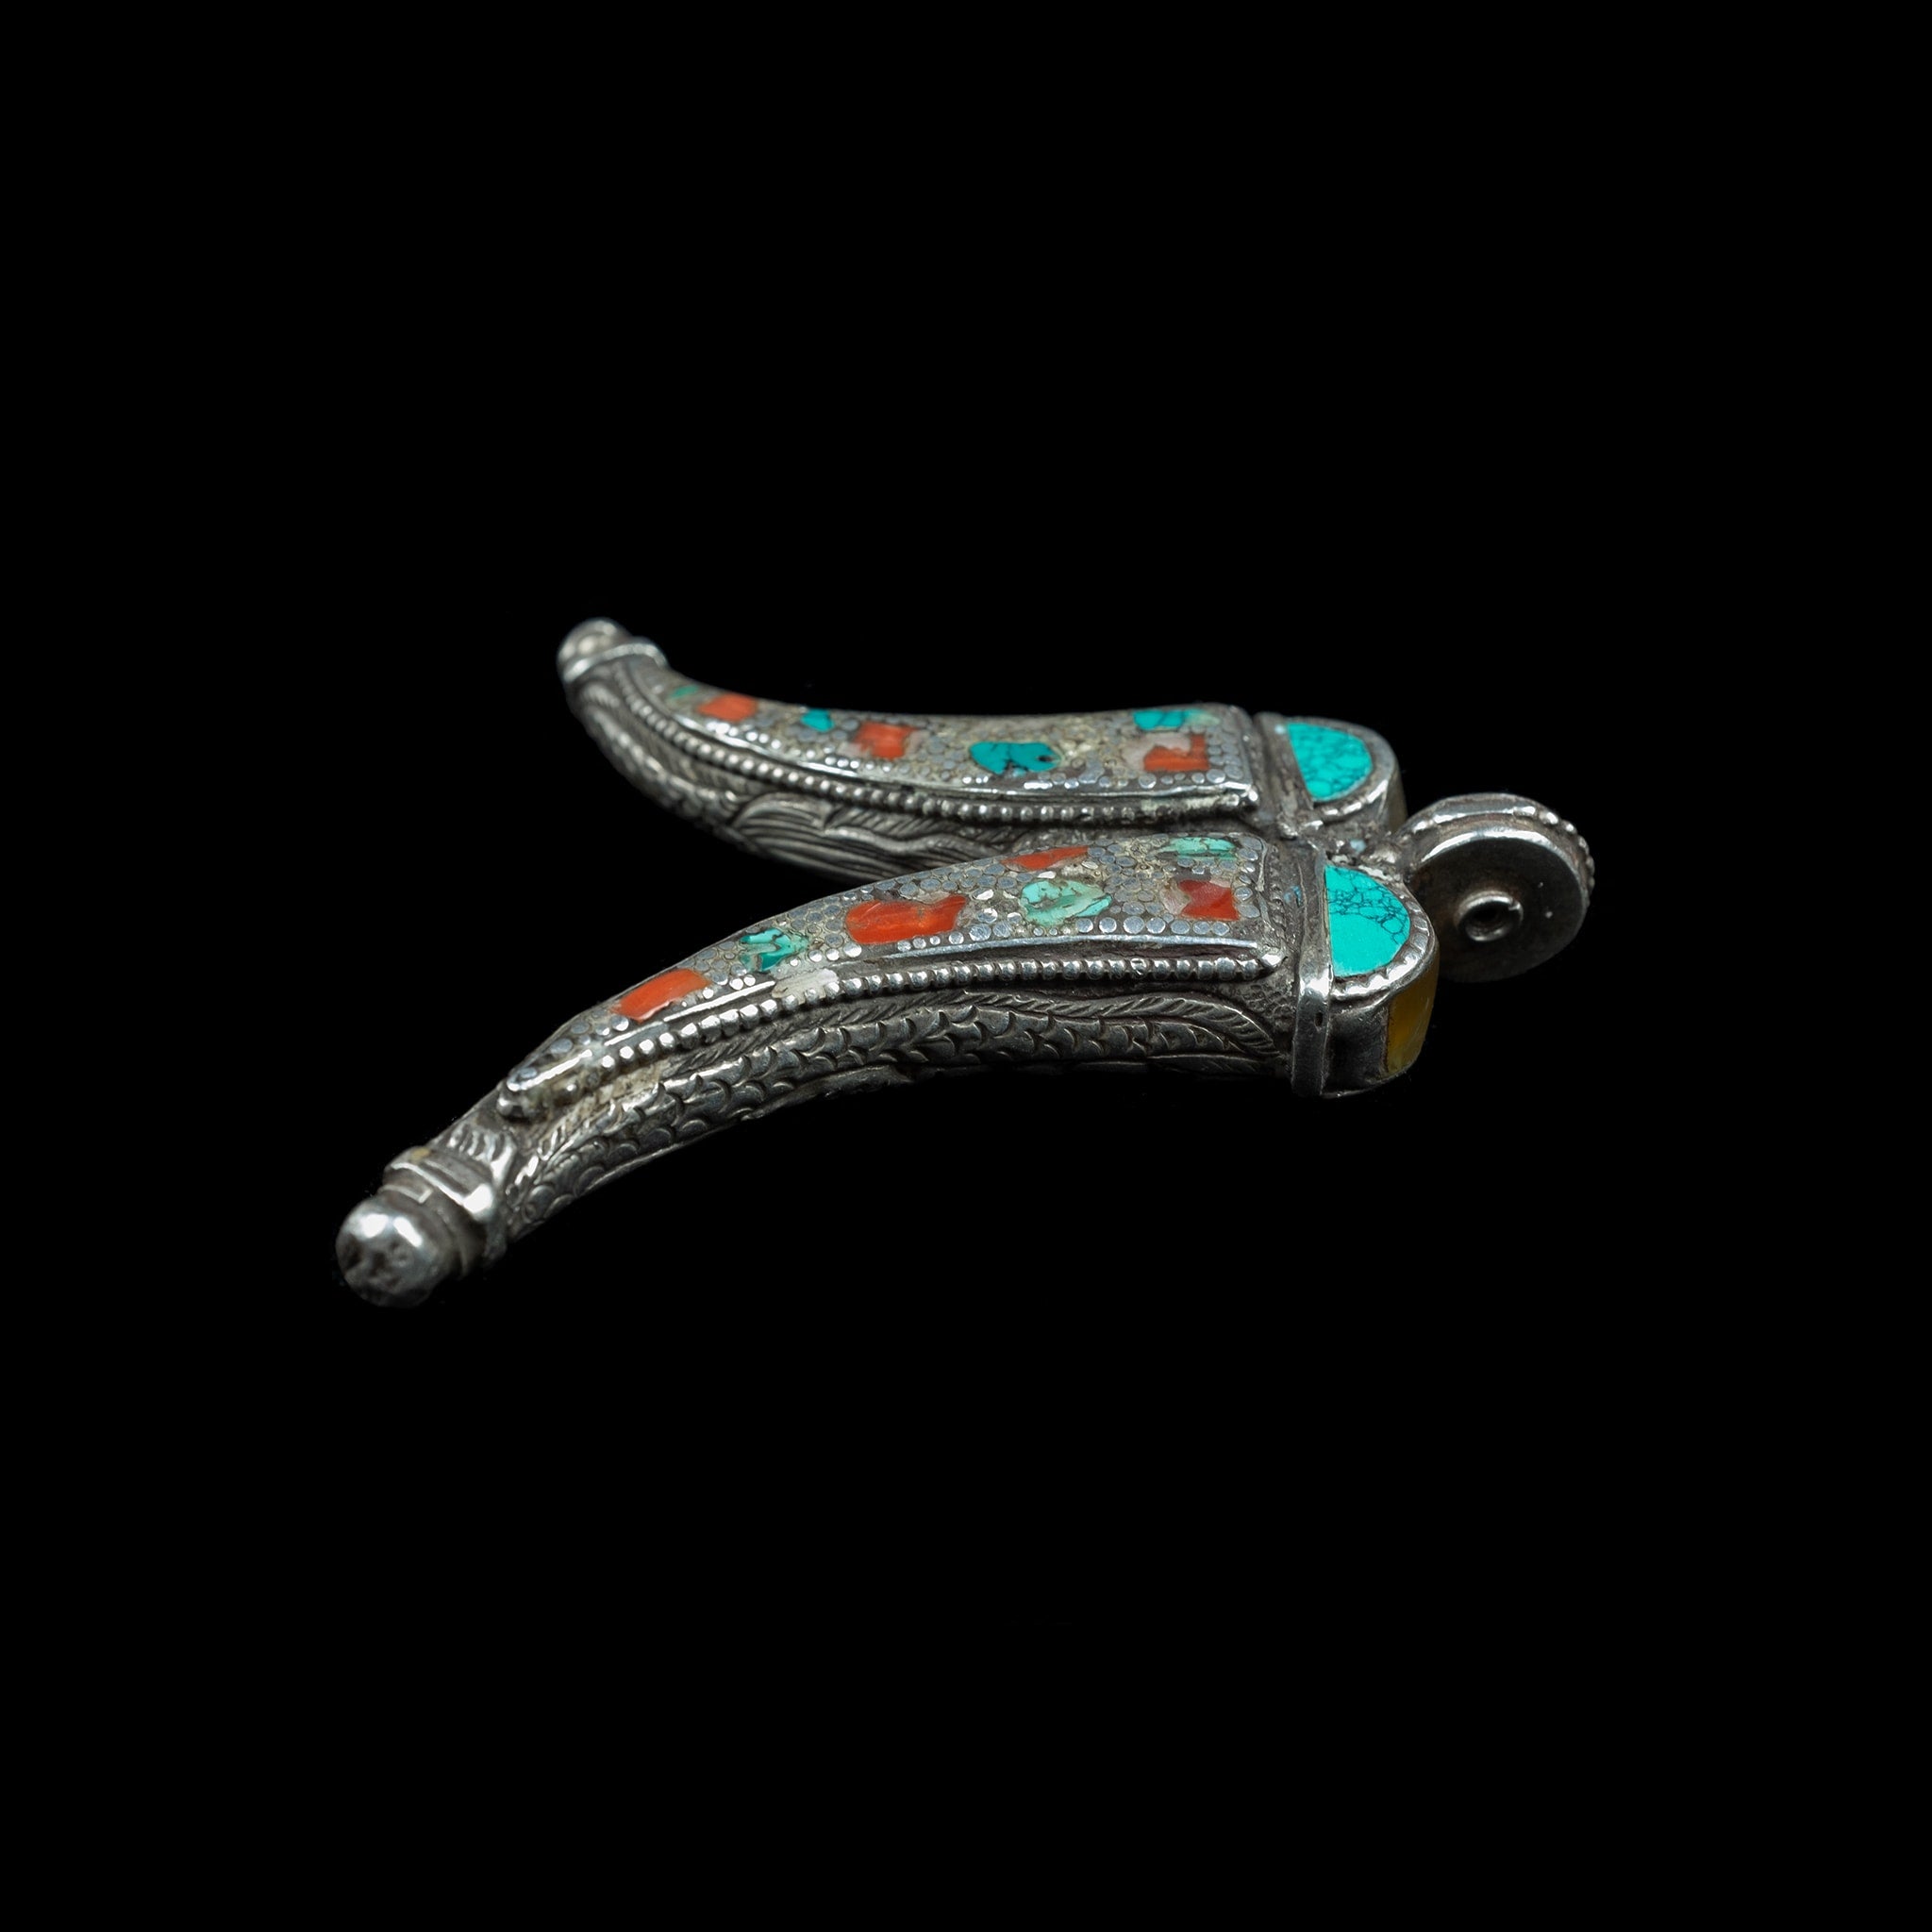 Himalayan Silver, Coral & Turquoise Pendant | Vintage Ethnic Jewellery